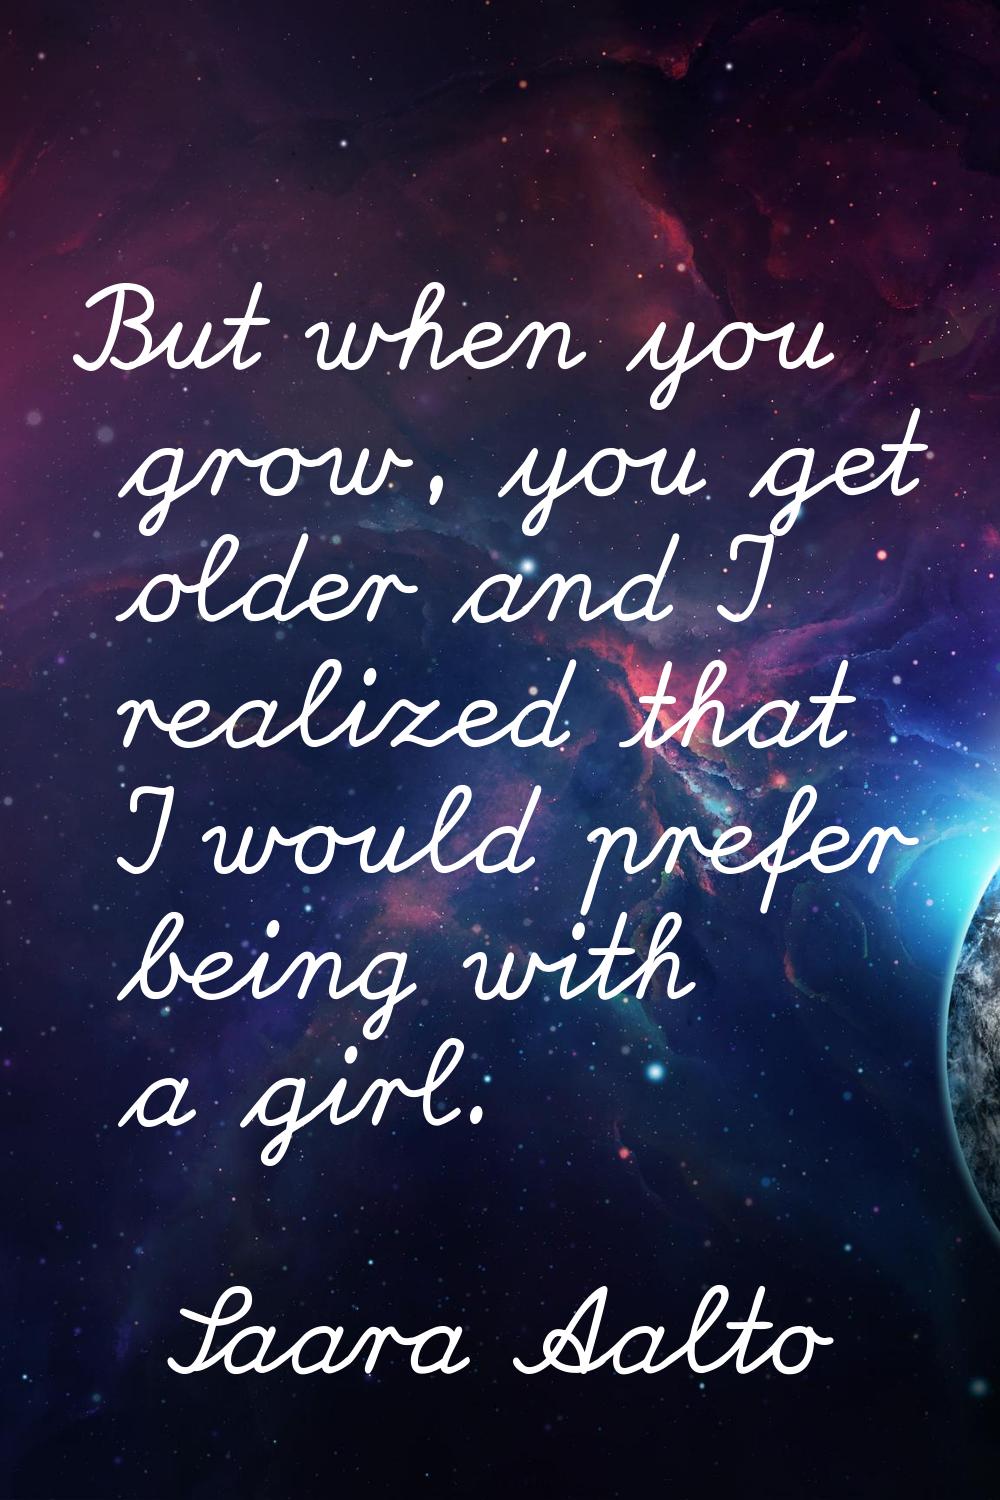 But when you grow, you get older and I realized that I would prefer being with a girl.